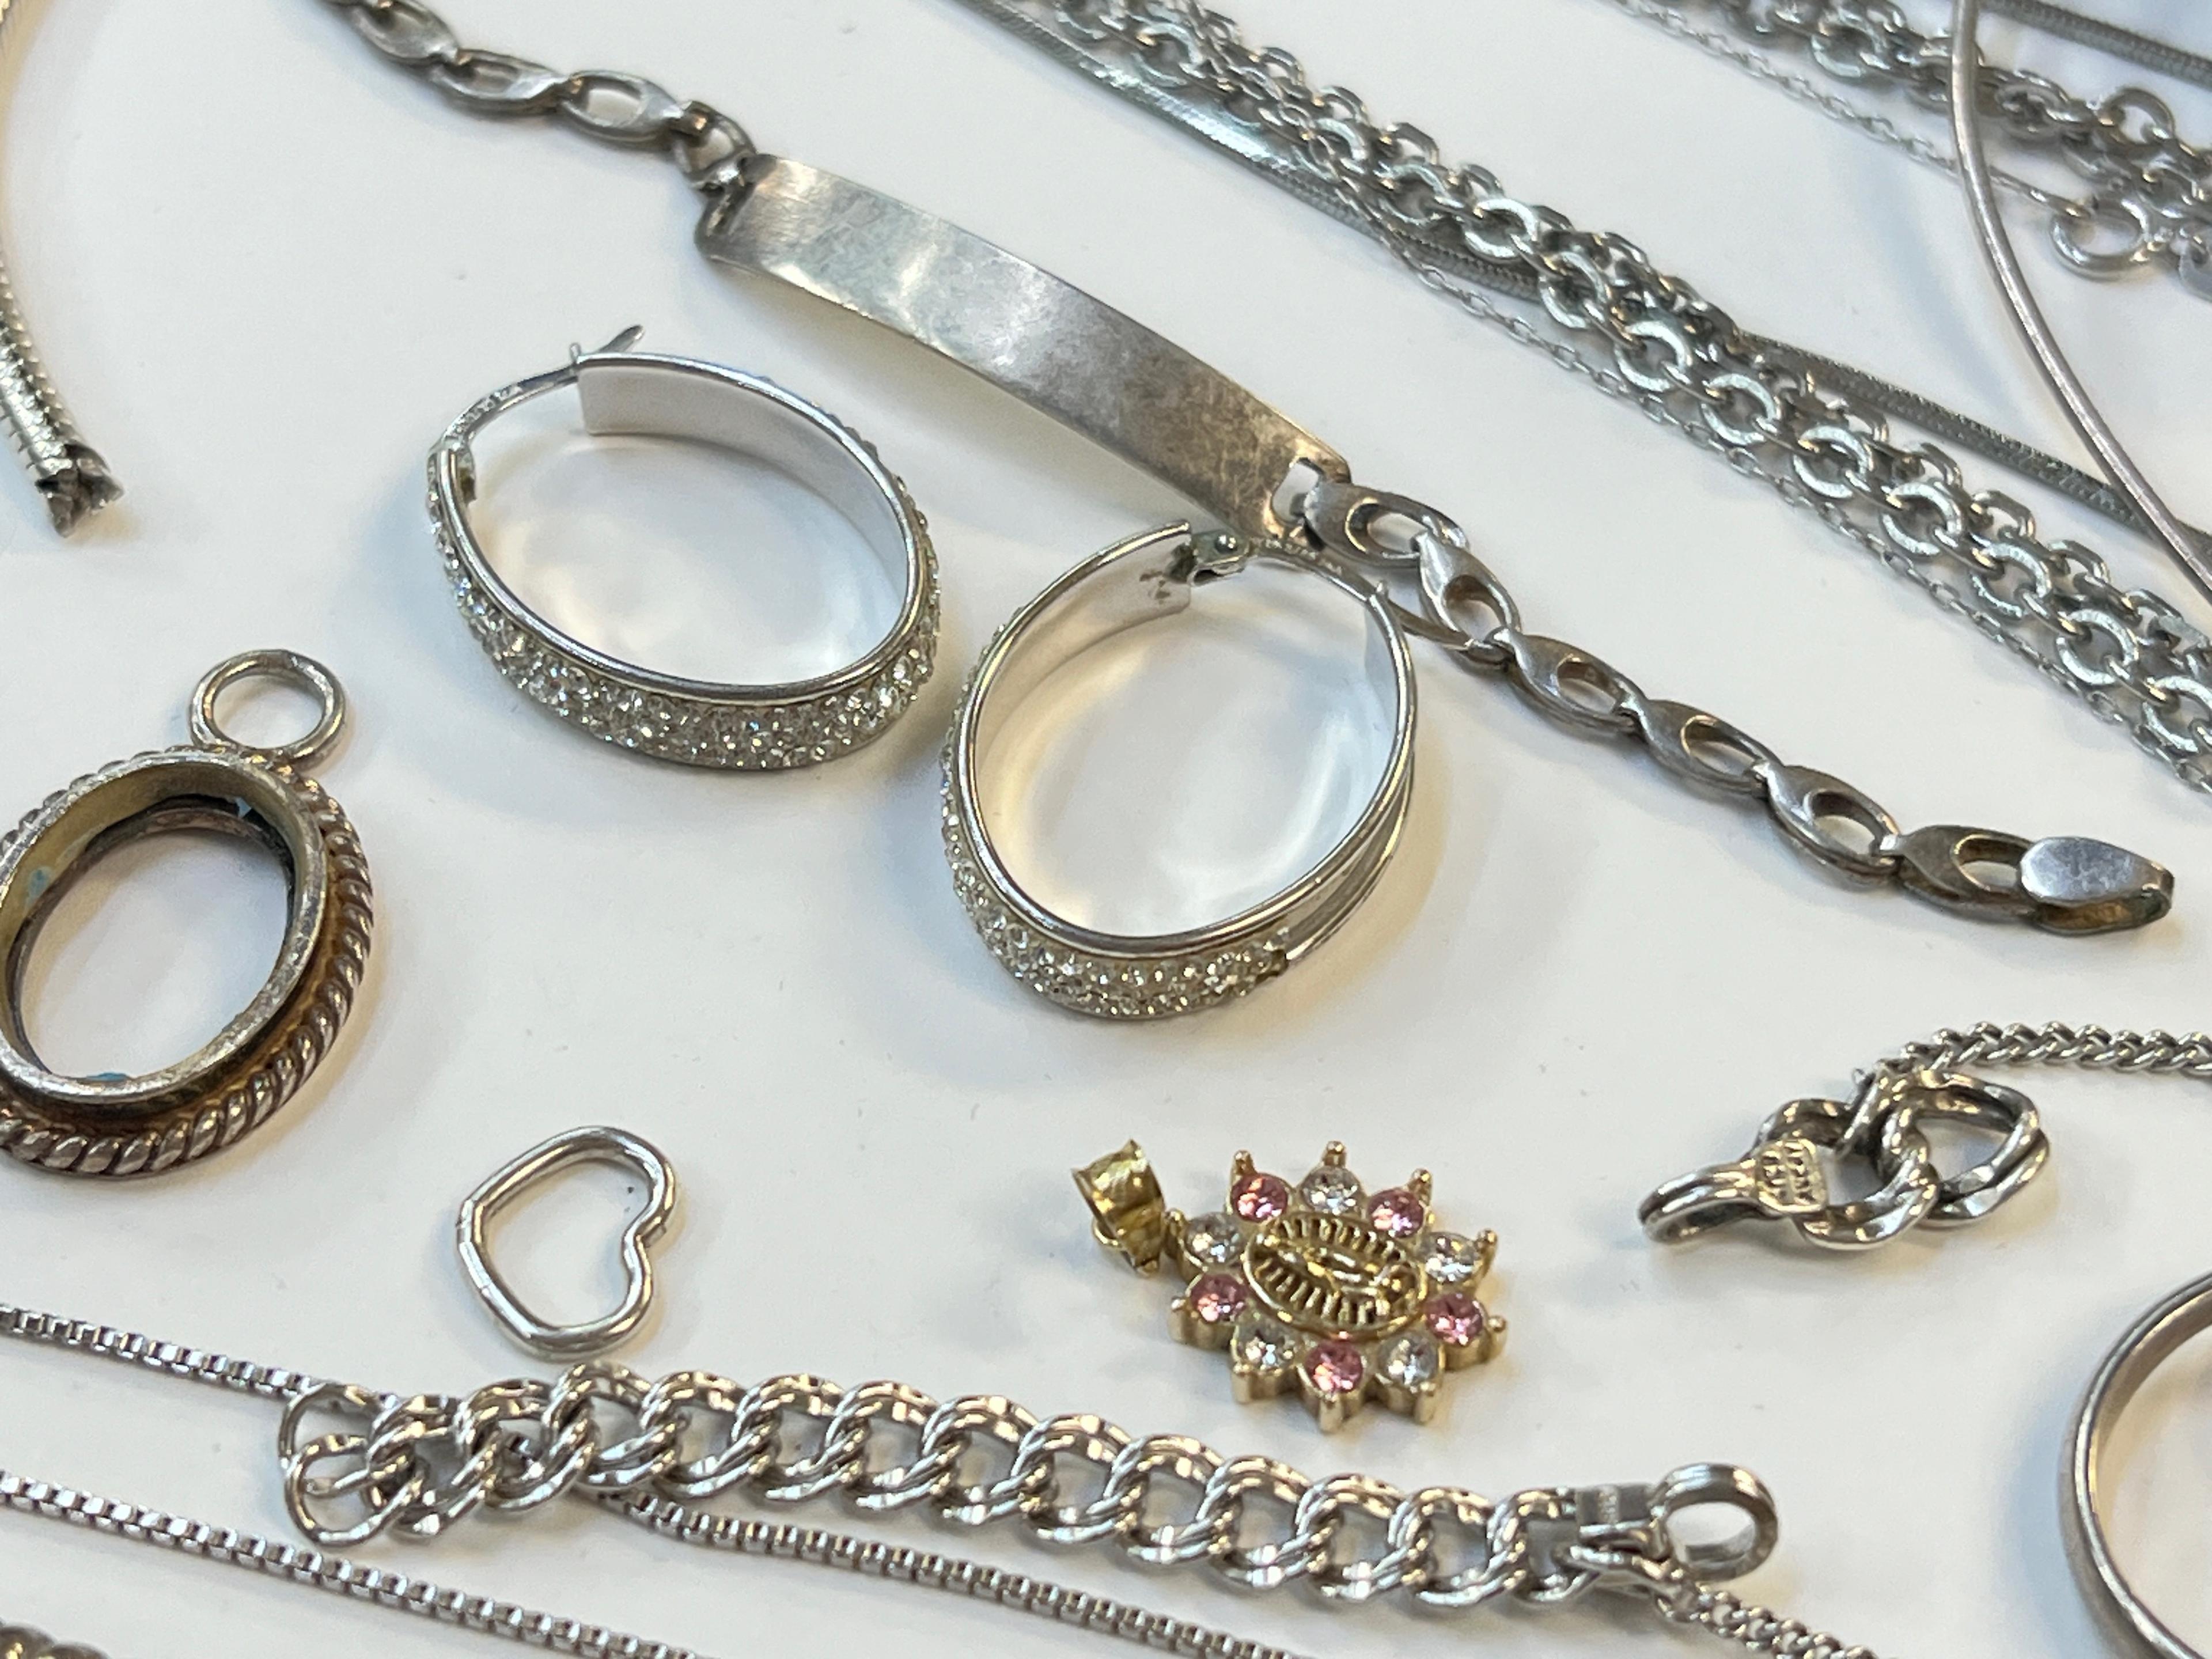 LARGE LOT OF STERLING & FASHION JEWELRY - SOME BROKEN/NEED REPAIR